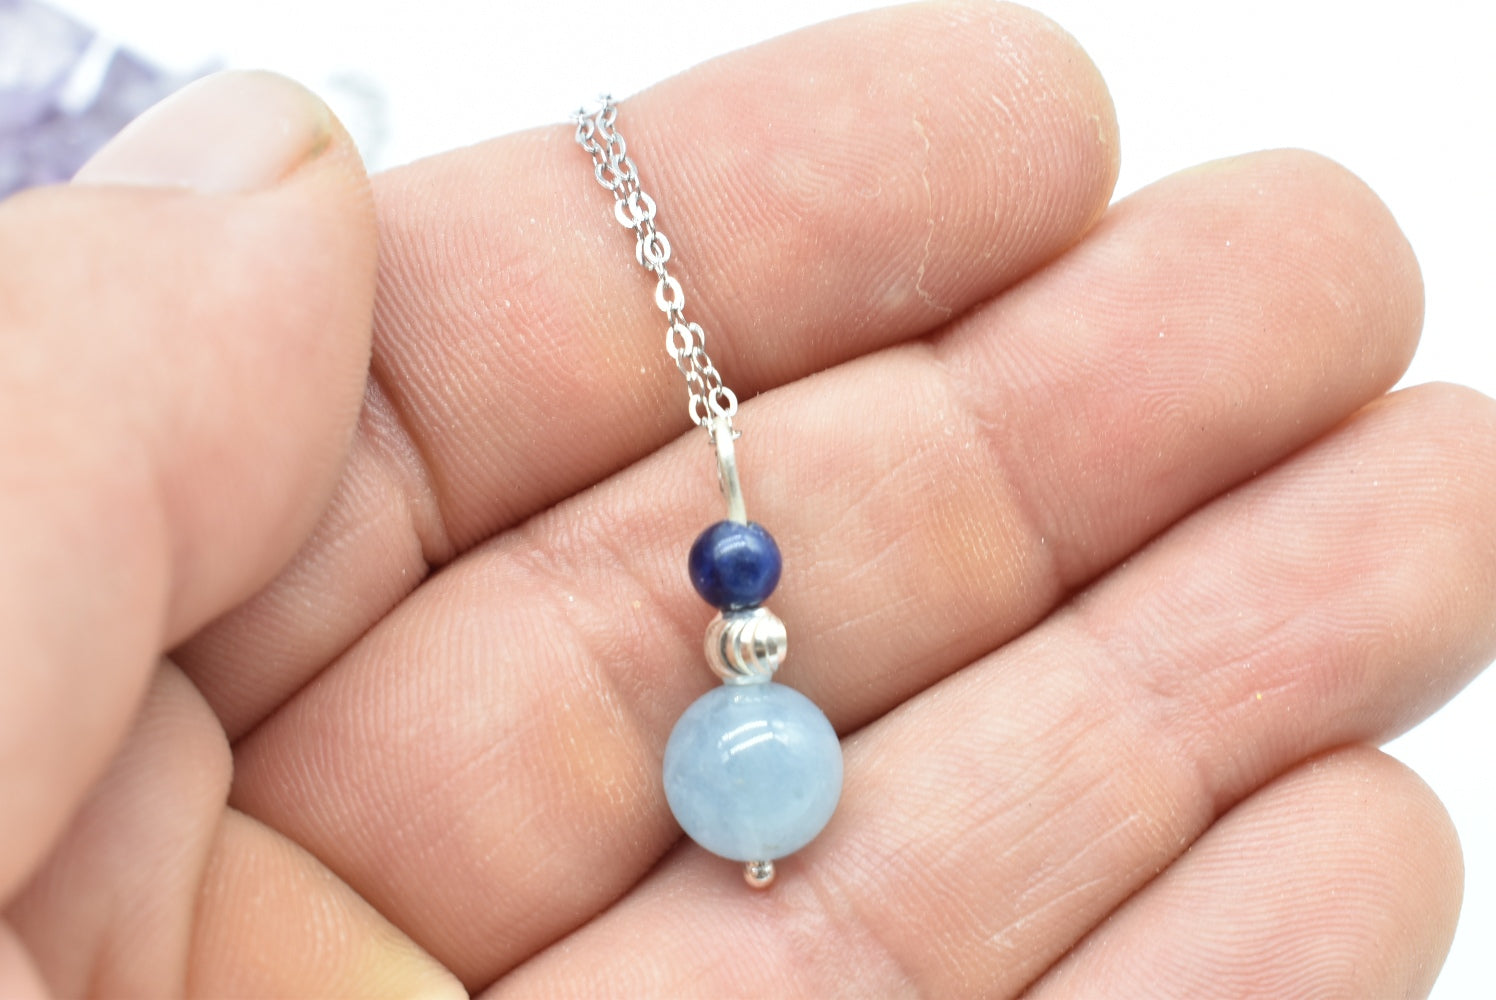 Aquamarine and sodalite beads pendant with supports and necklace in 925 Silver